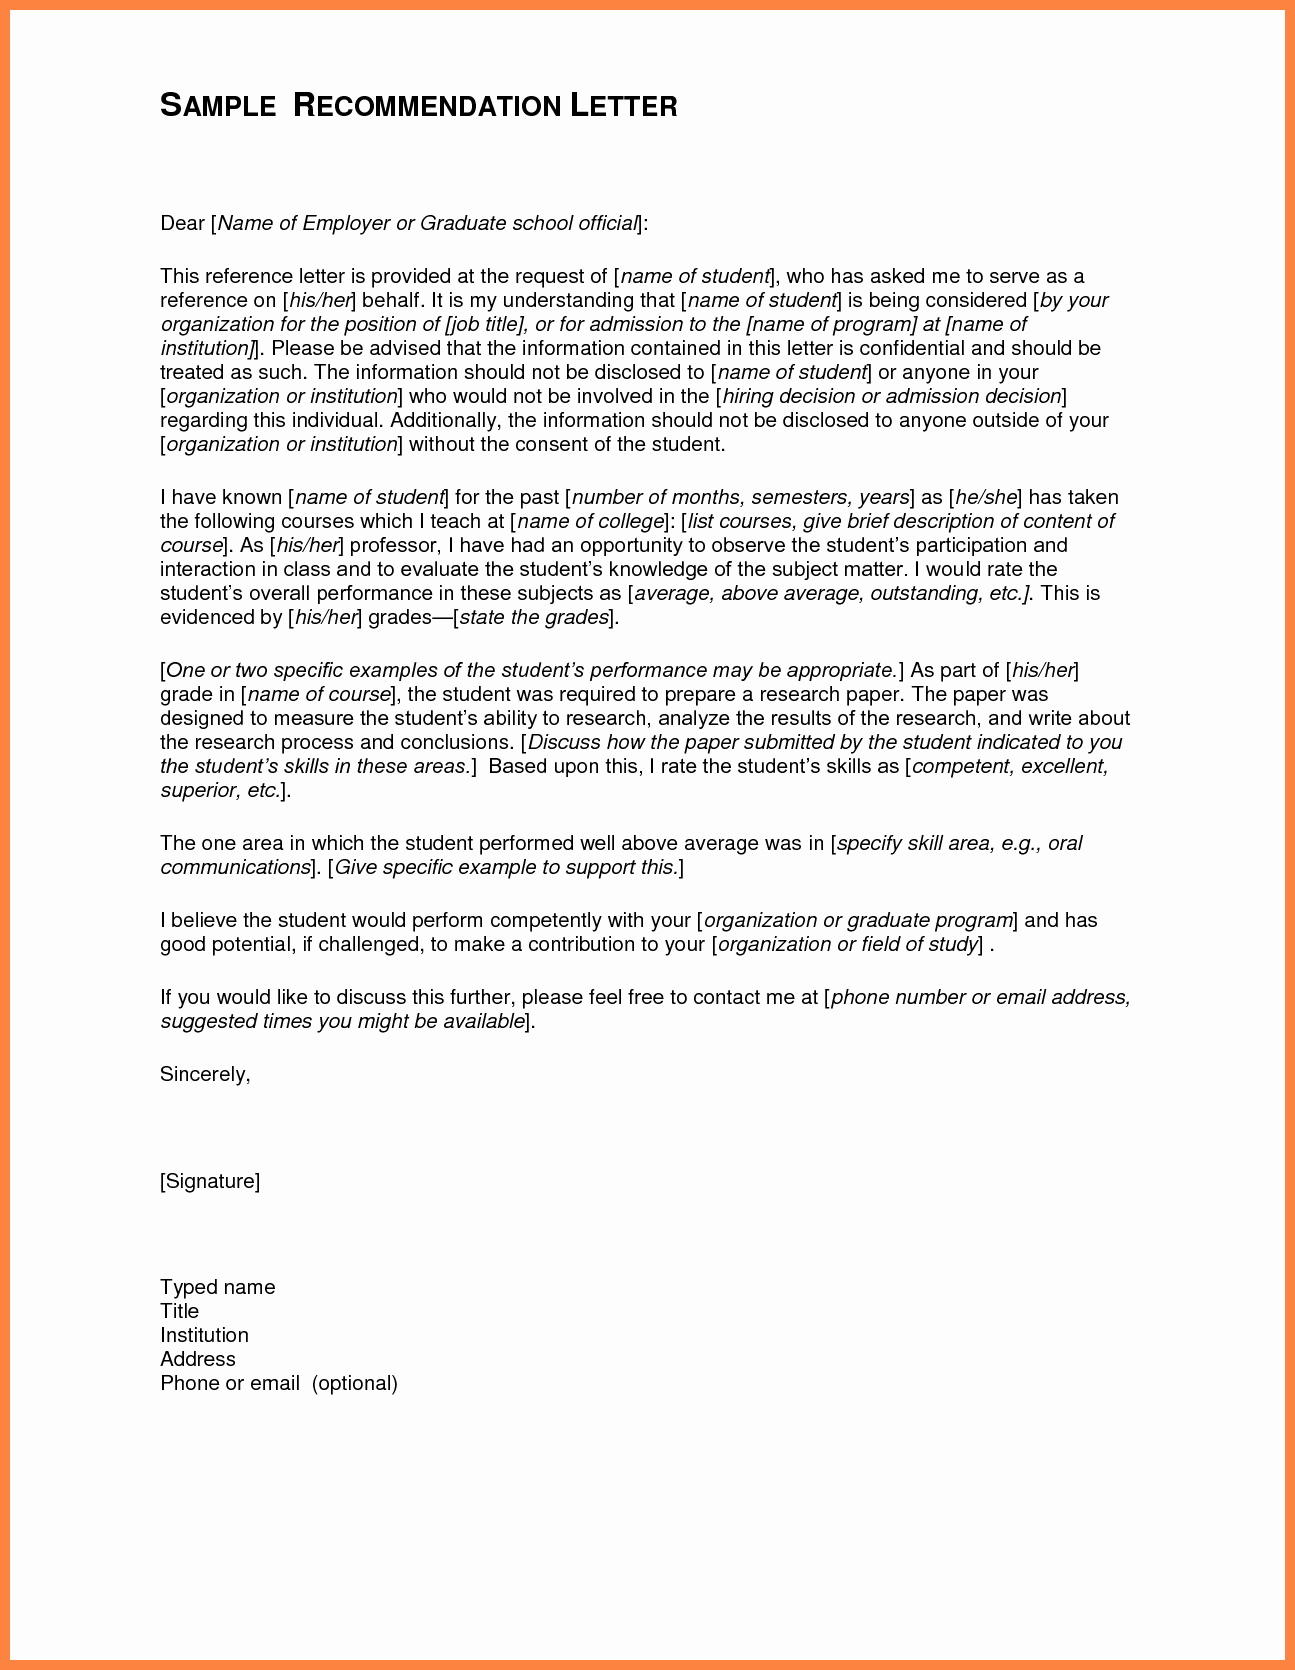 Grad School Letter Of Recommendation Awesome 6 Letter Of Re Mendation Graduate School